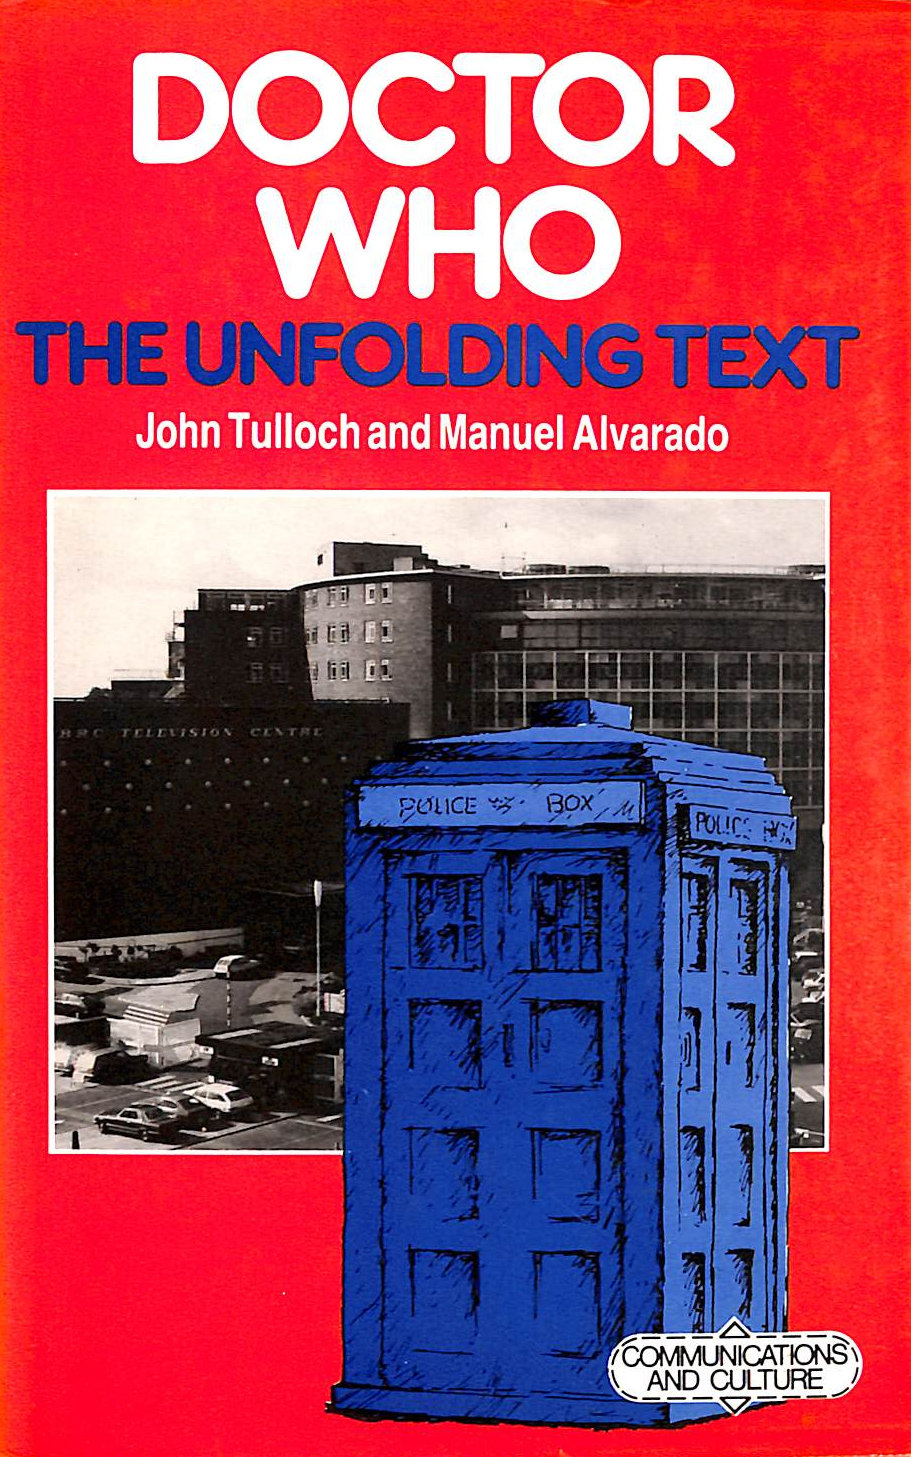 J TULLOCH. M ALVARADO - Doctor Who: The Unfolding Text (Communications & Culture)